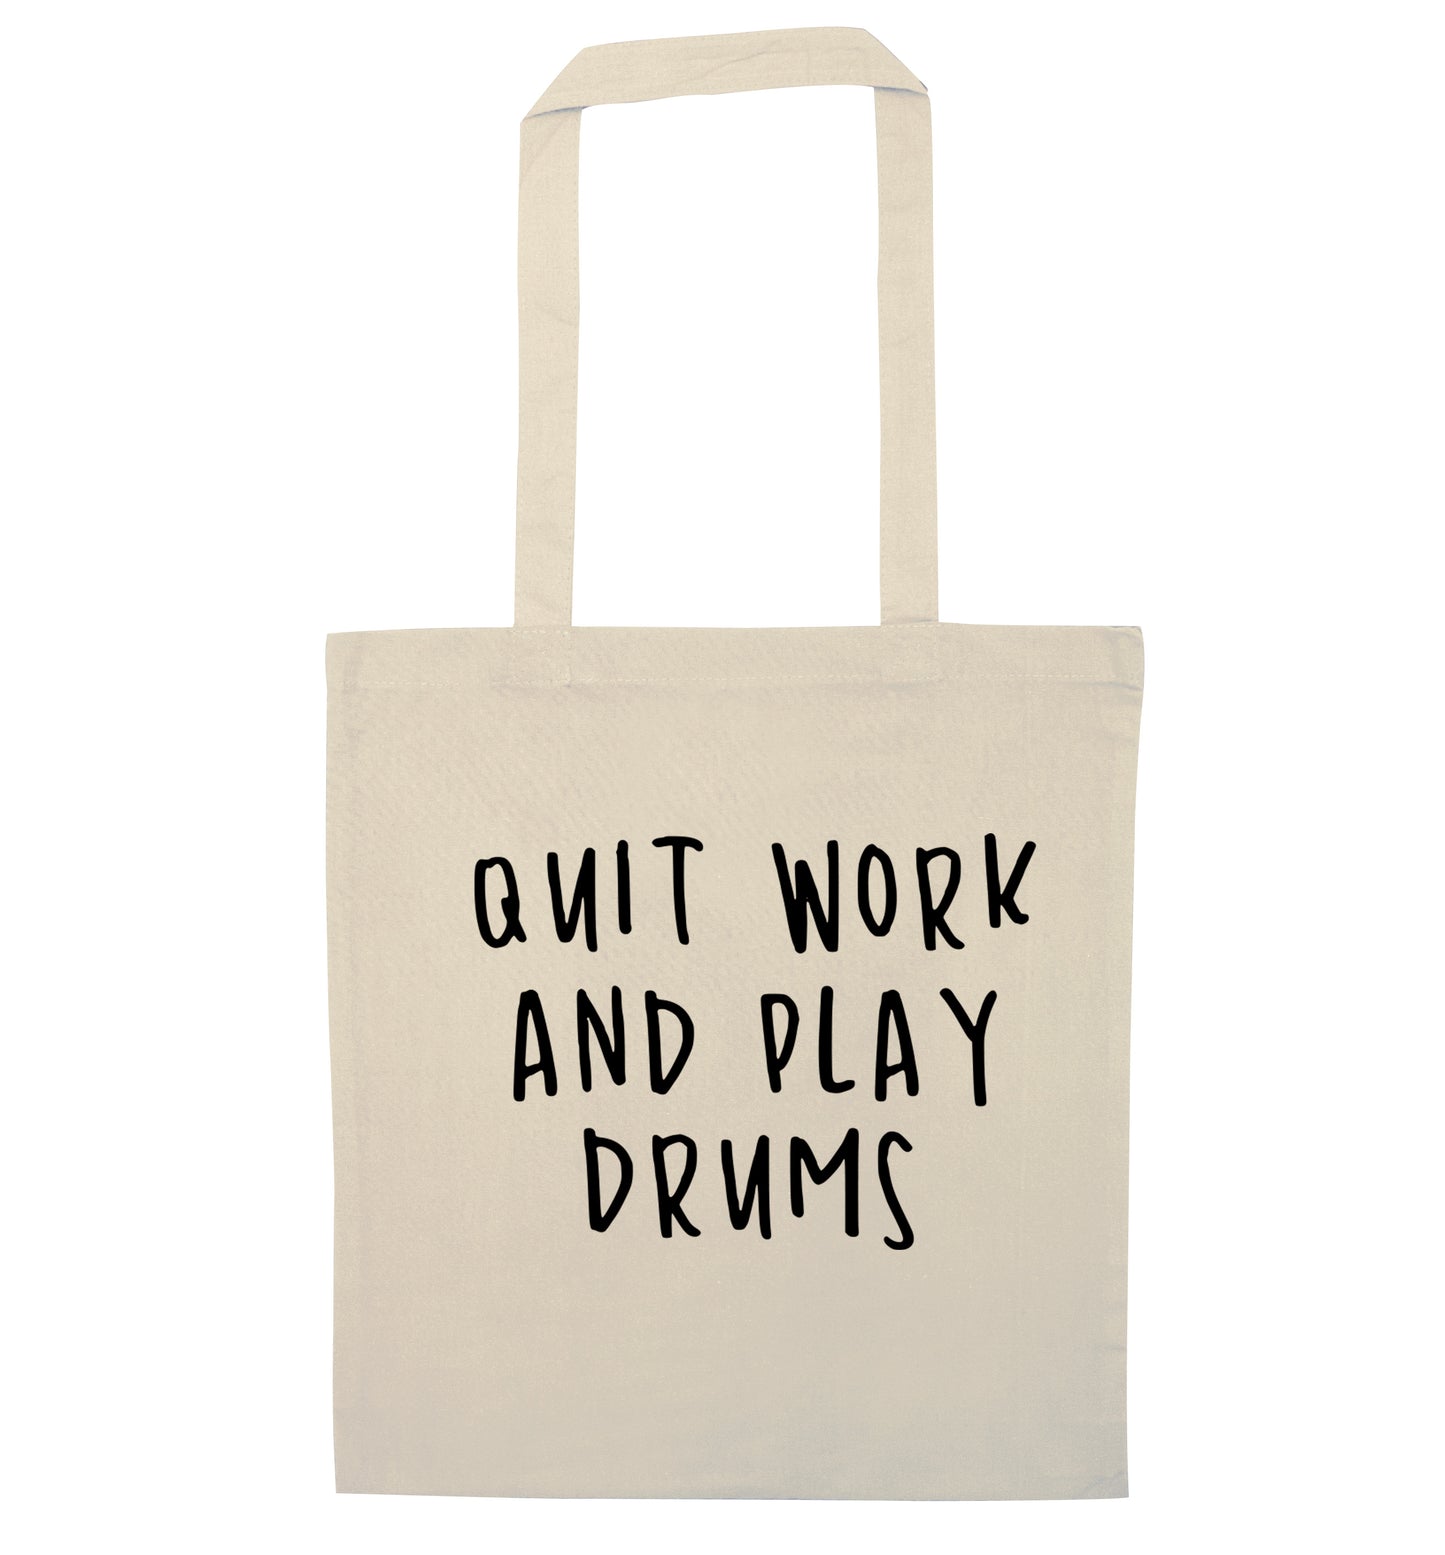 Quit work and play drums natural tote bag